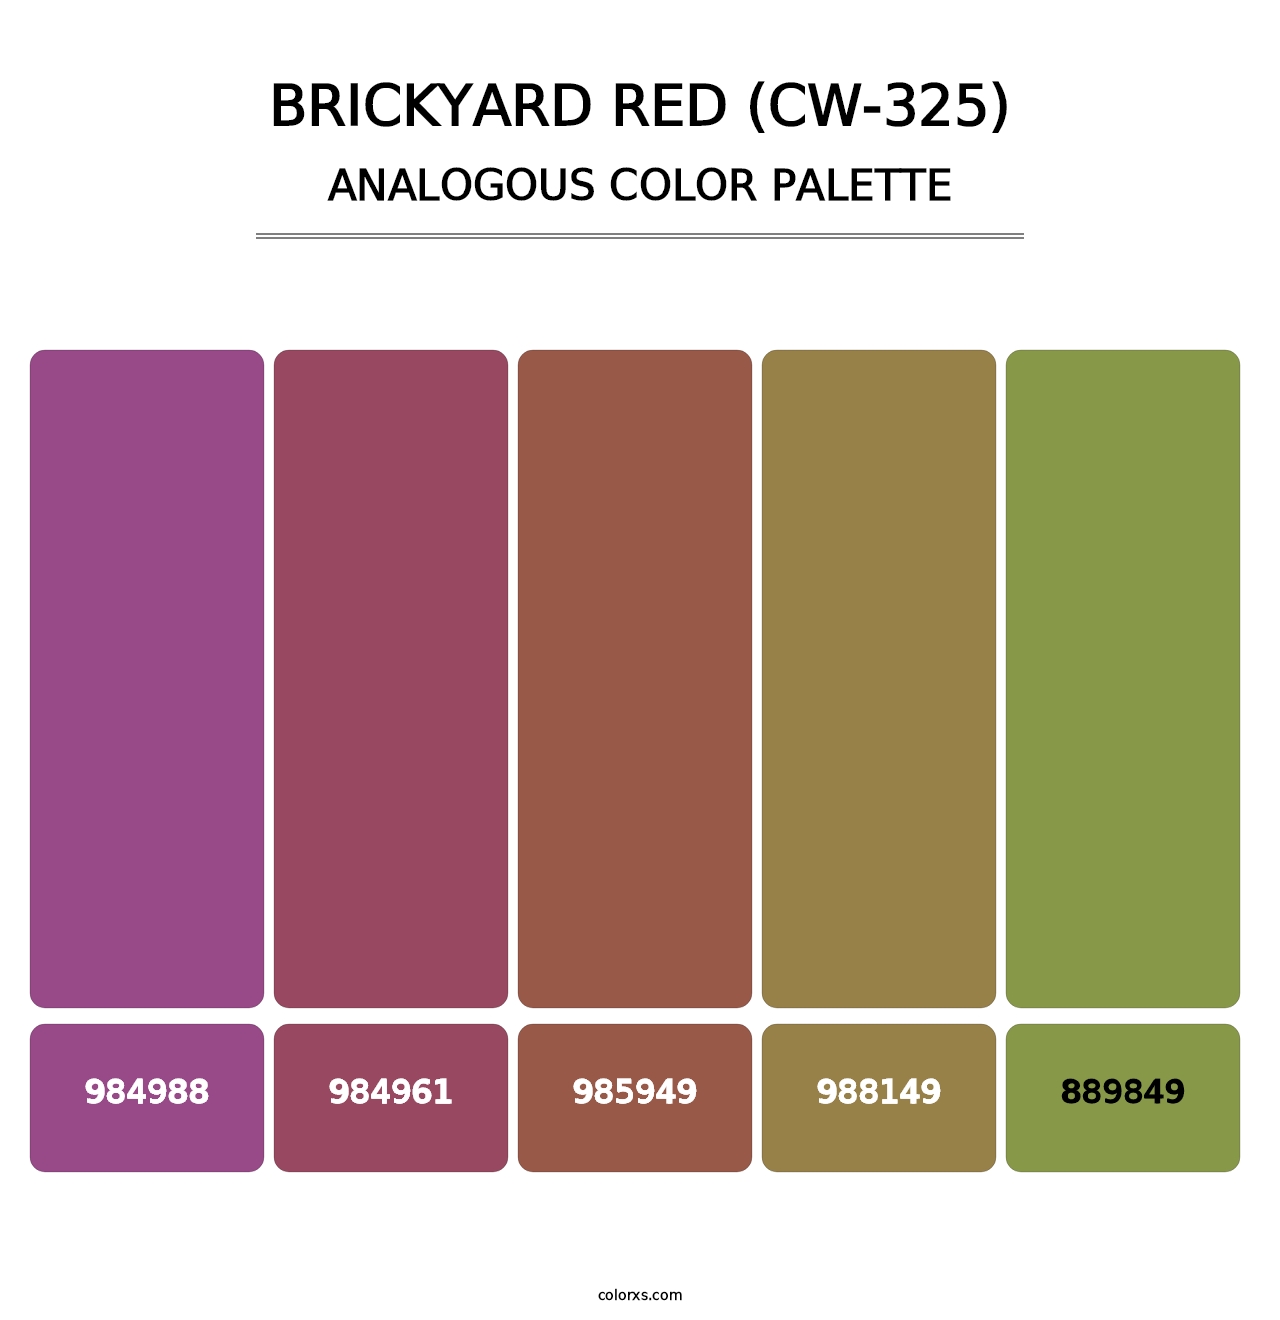 Brickyard Red (CW-325) - Analogous Color Palette